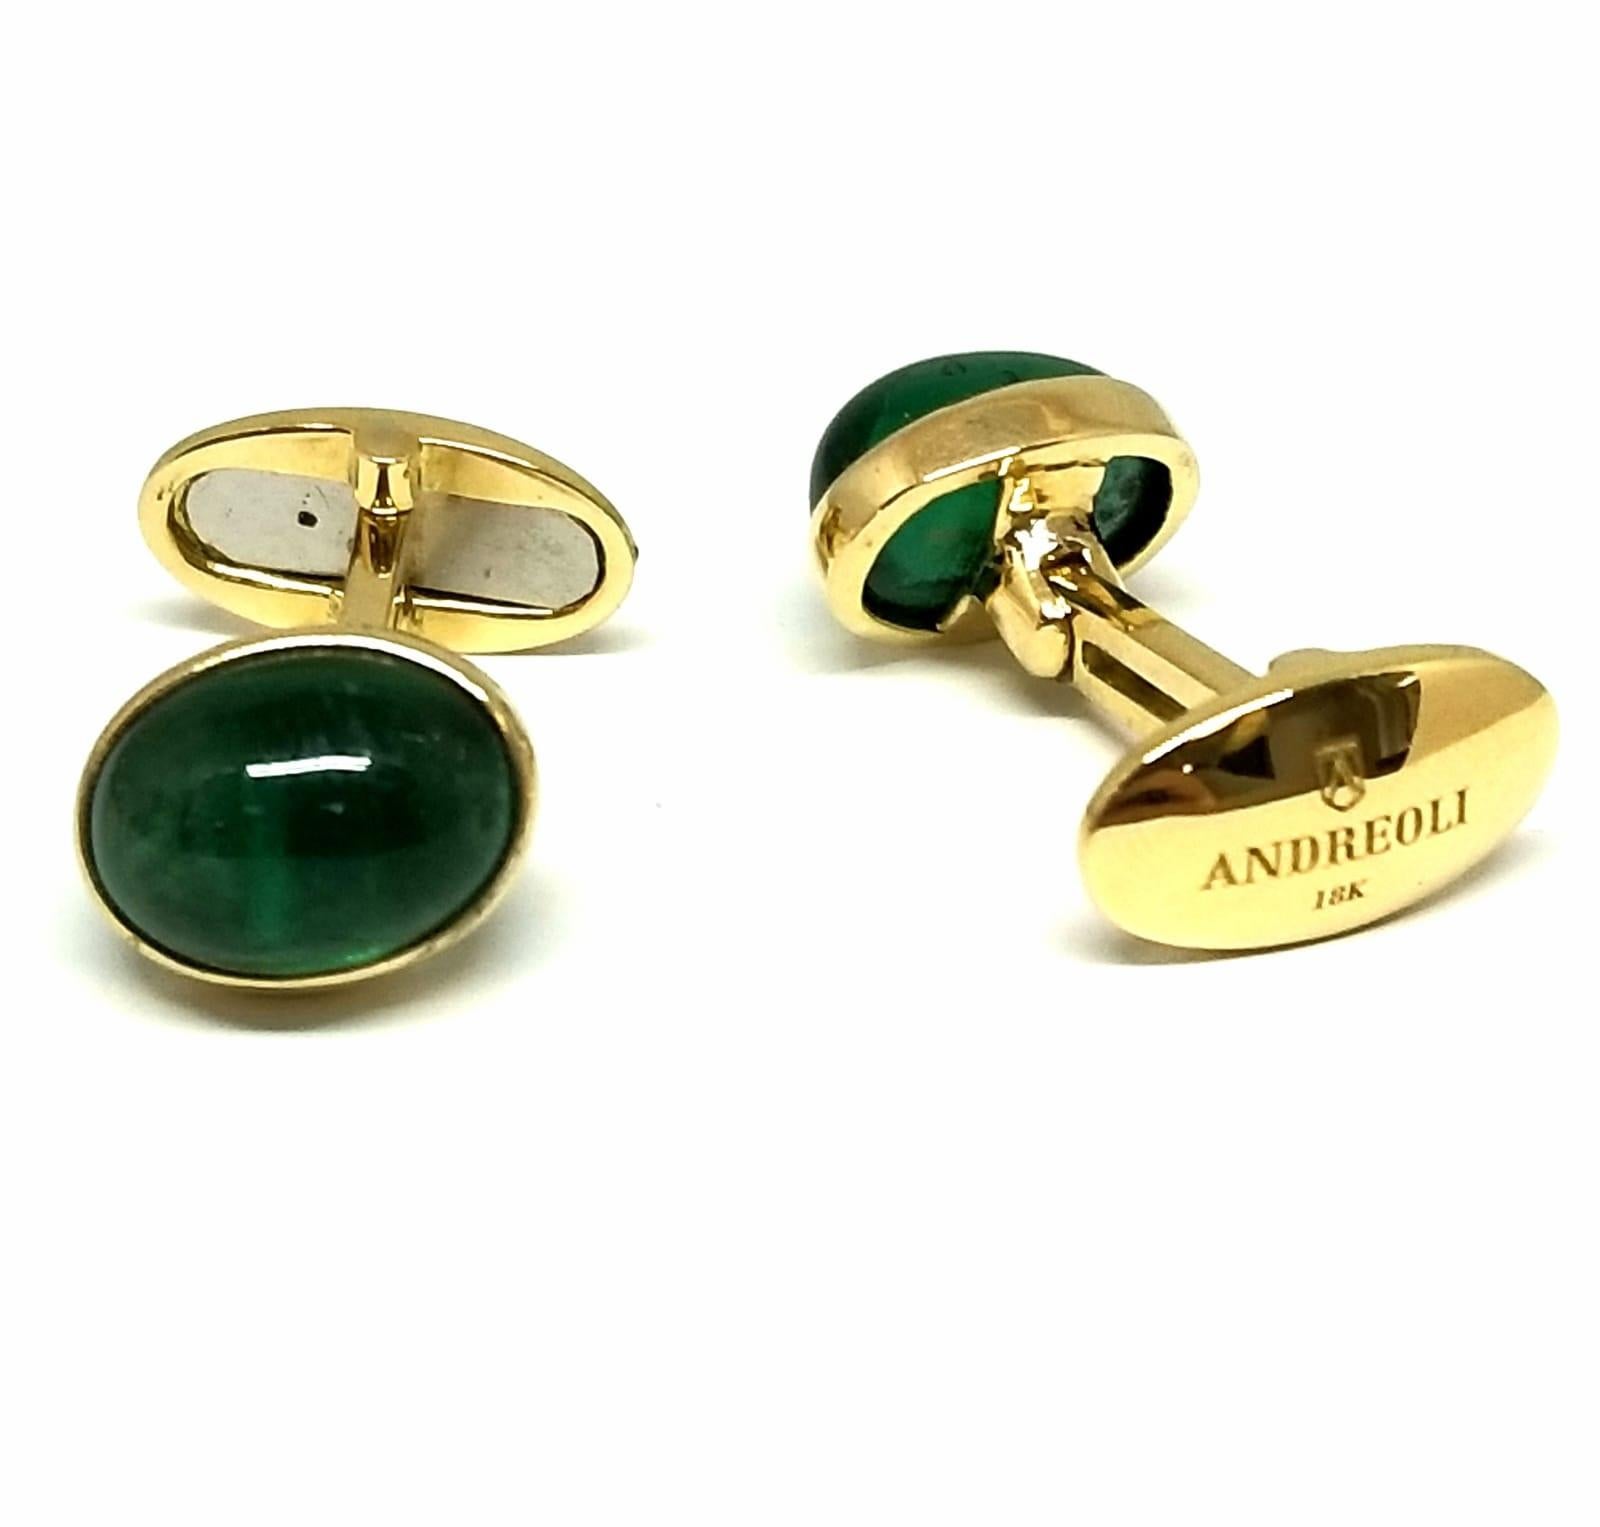 Andreoli 9.85 Carat Emerald 18 Karat Yellow Gold Cufflinks

These cufflinks feature:
- 9.85 carat Emerald
- 9.24 18k Yellow Gold
- Made In Italy